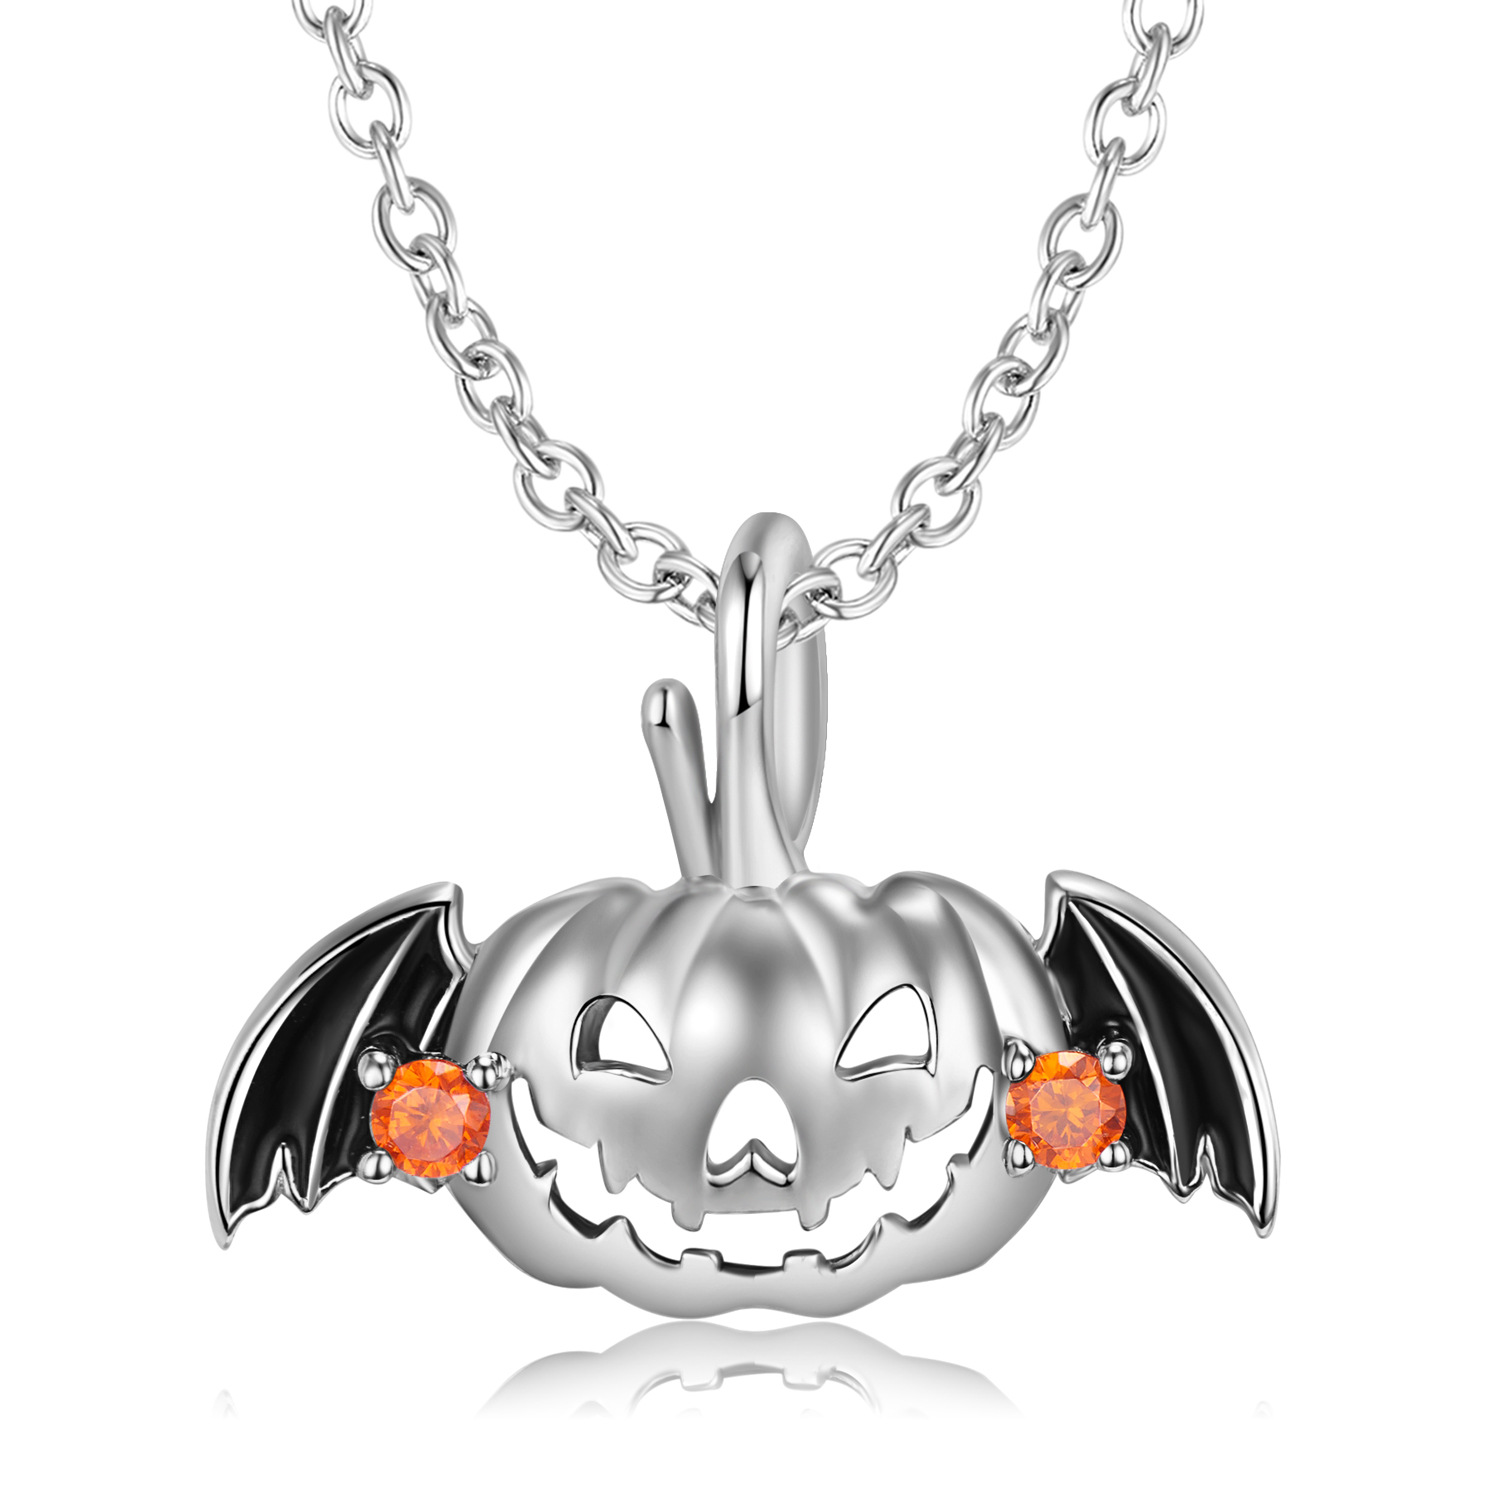 Drop hollow Flying Pumpkin Sterling Silver Pendant Necklace